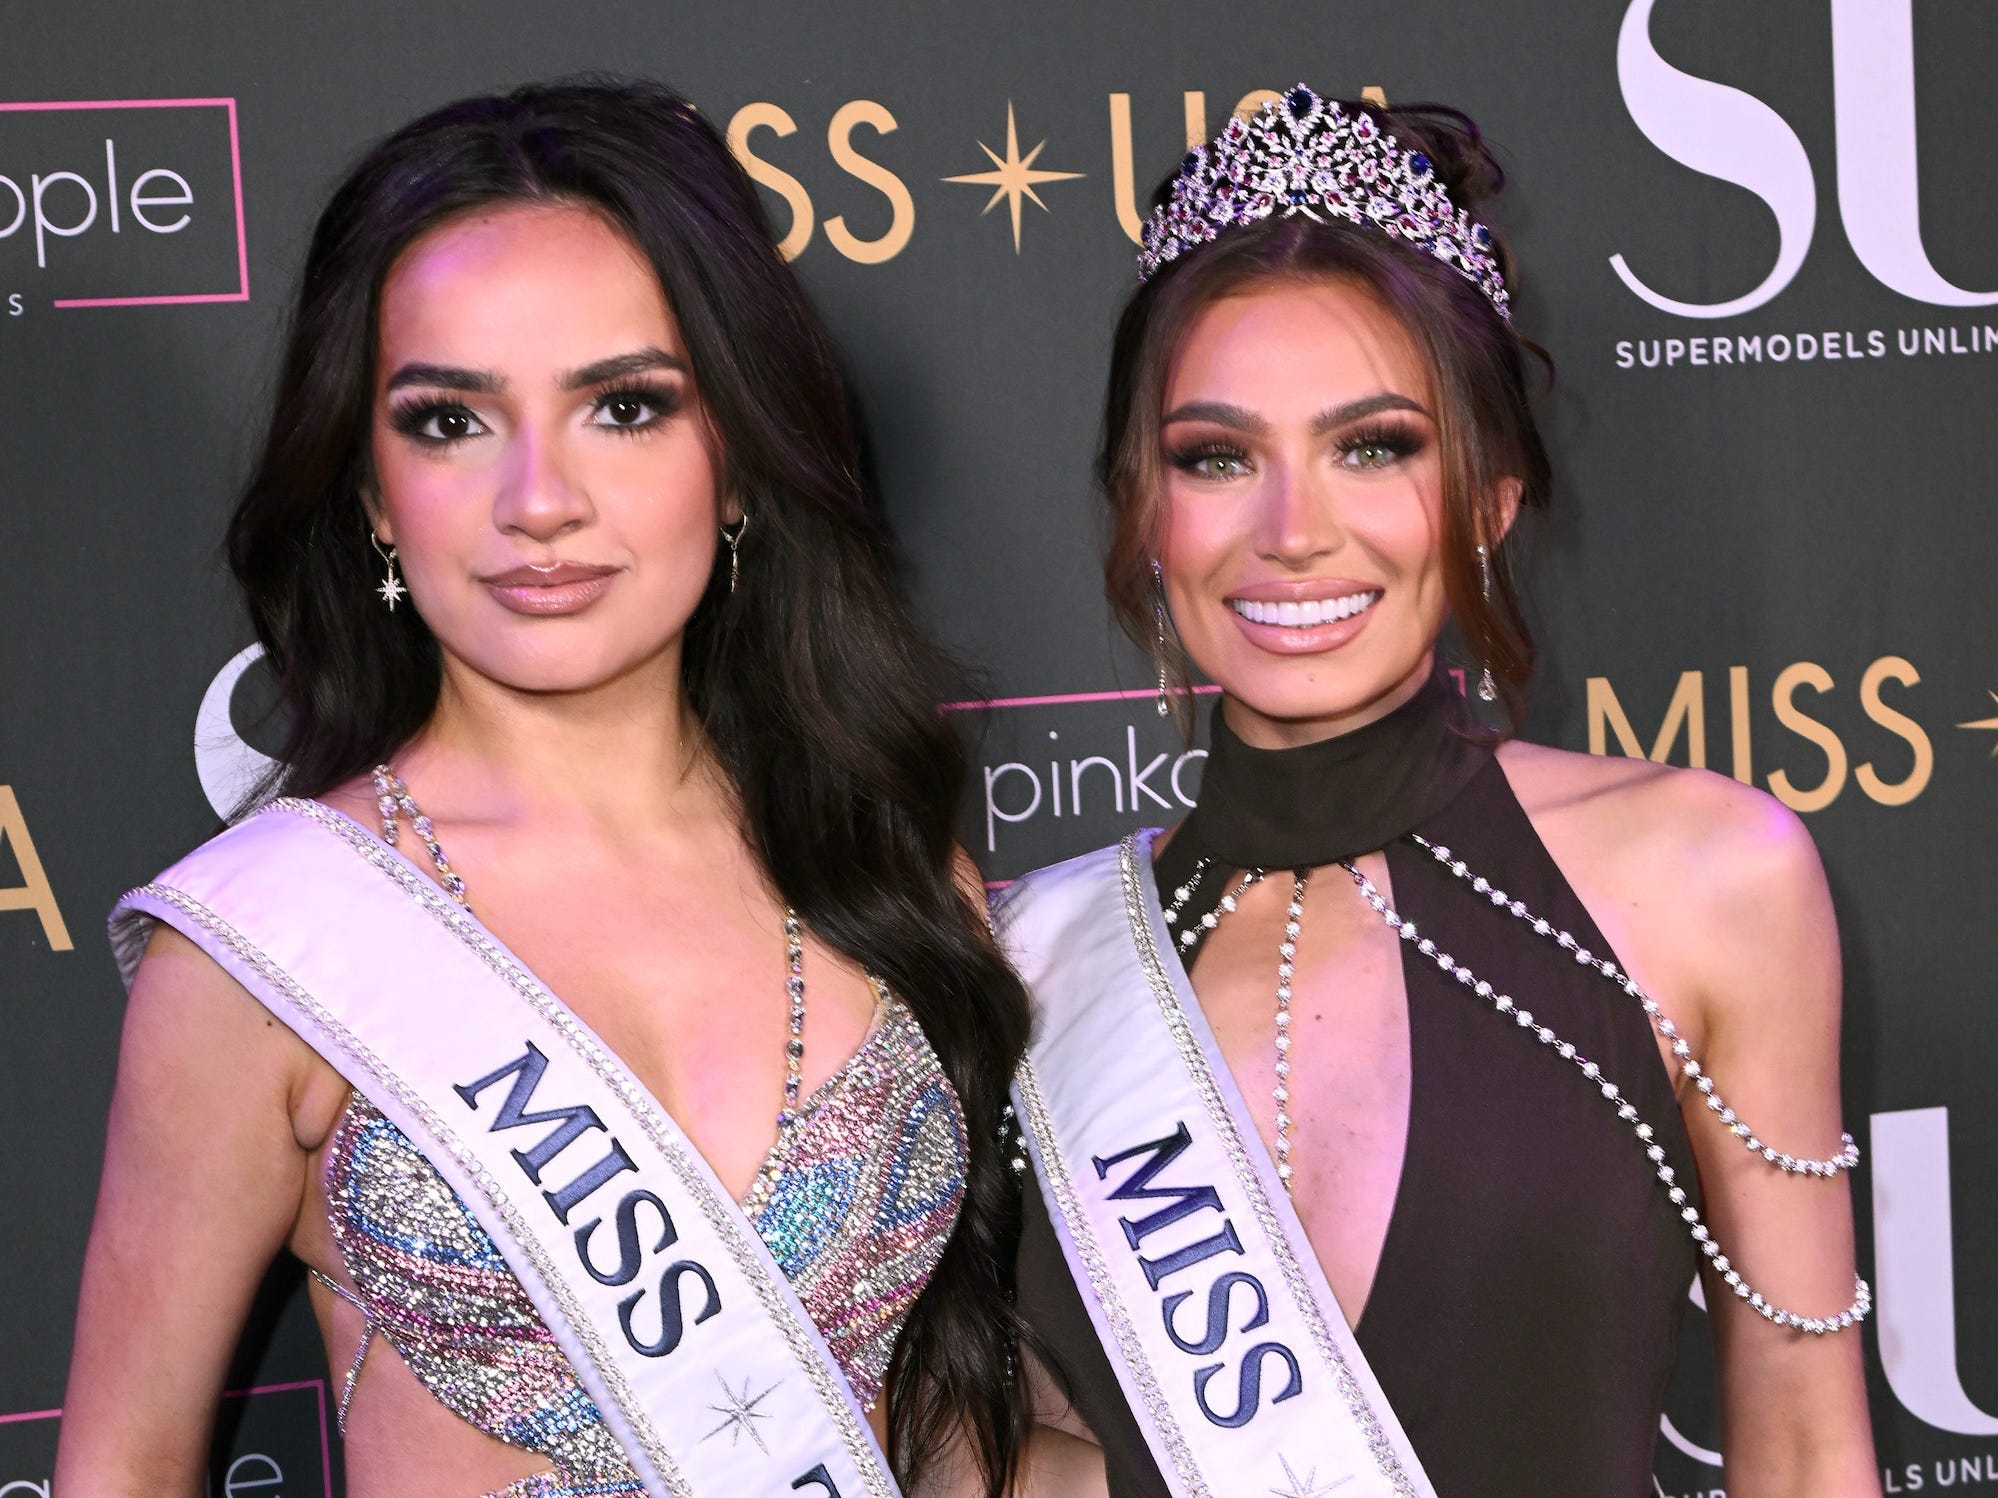 The Miss USA pageant can't escape controversy. Here's a timeline of all the drama.